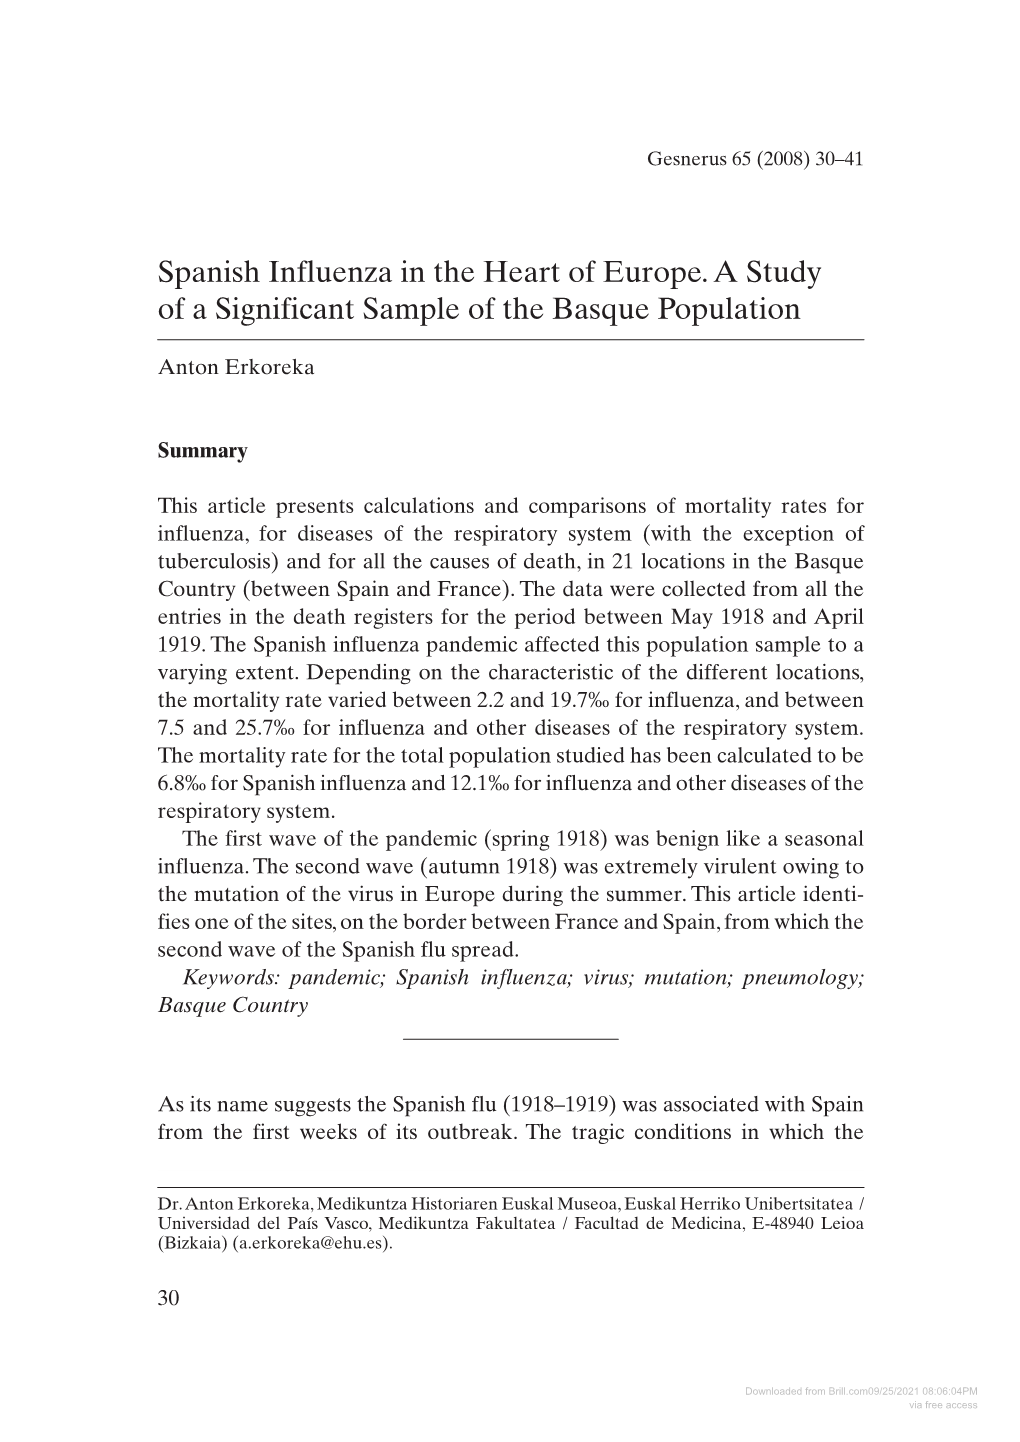 Spanish Influenza in the Heart of Europe. a Study of a Significant Sample of the Basque Population